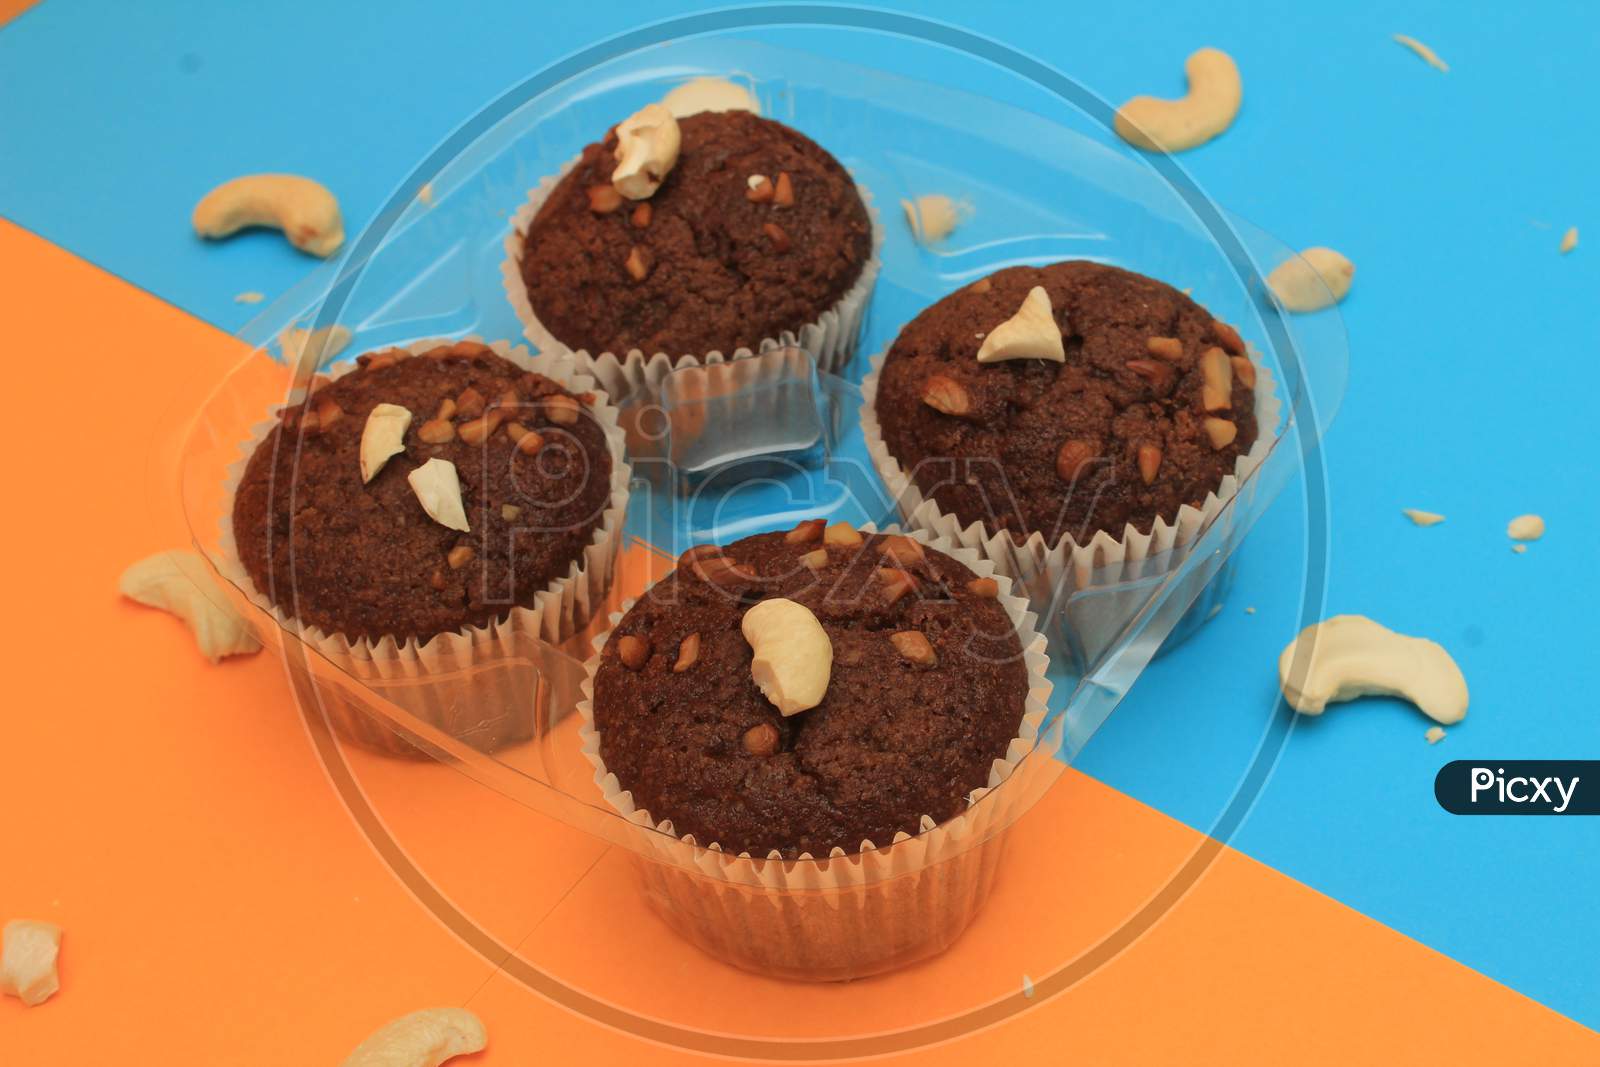 Chocolate Muffin Isolated On Color Background. Delicious Chocolate Muffin With Nuts.